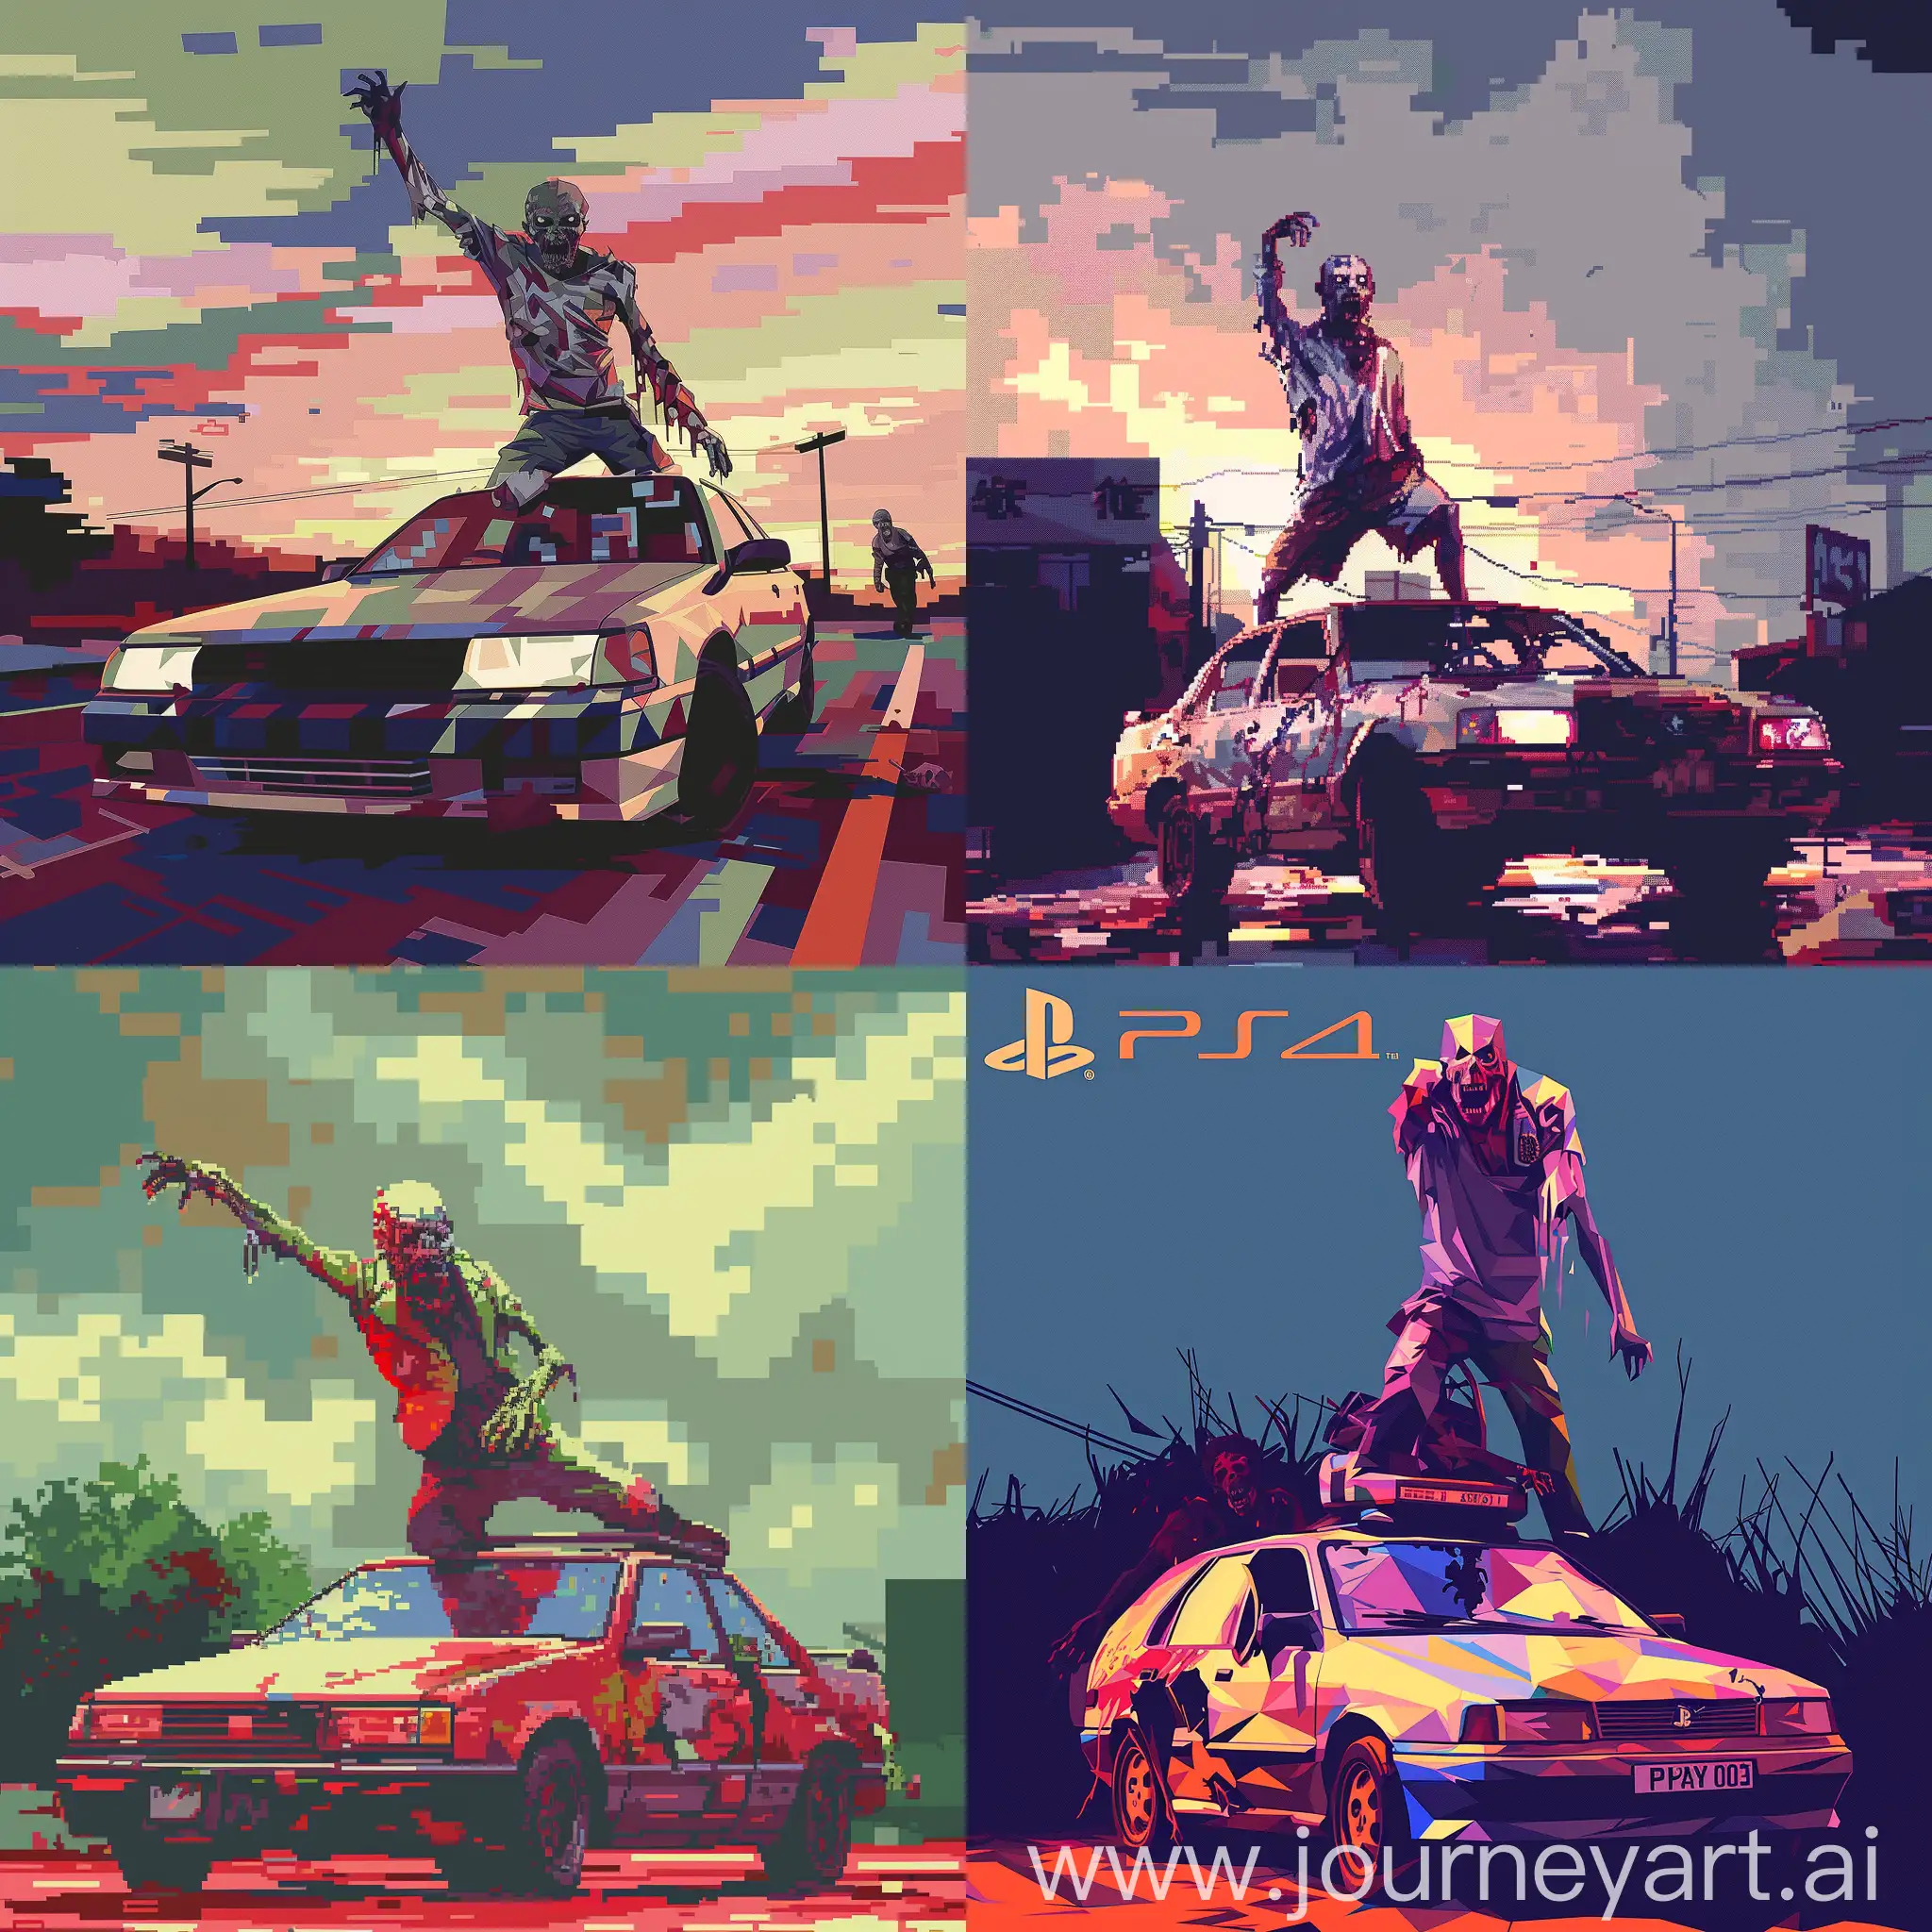 PS1-Style-Low-Poly-Pixelated-Zombie-on-Car